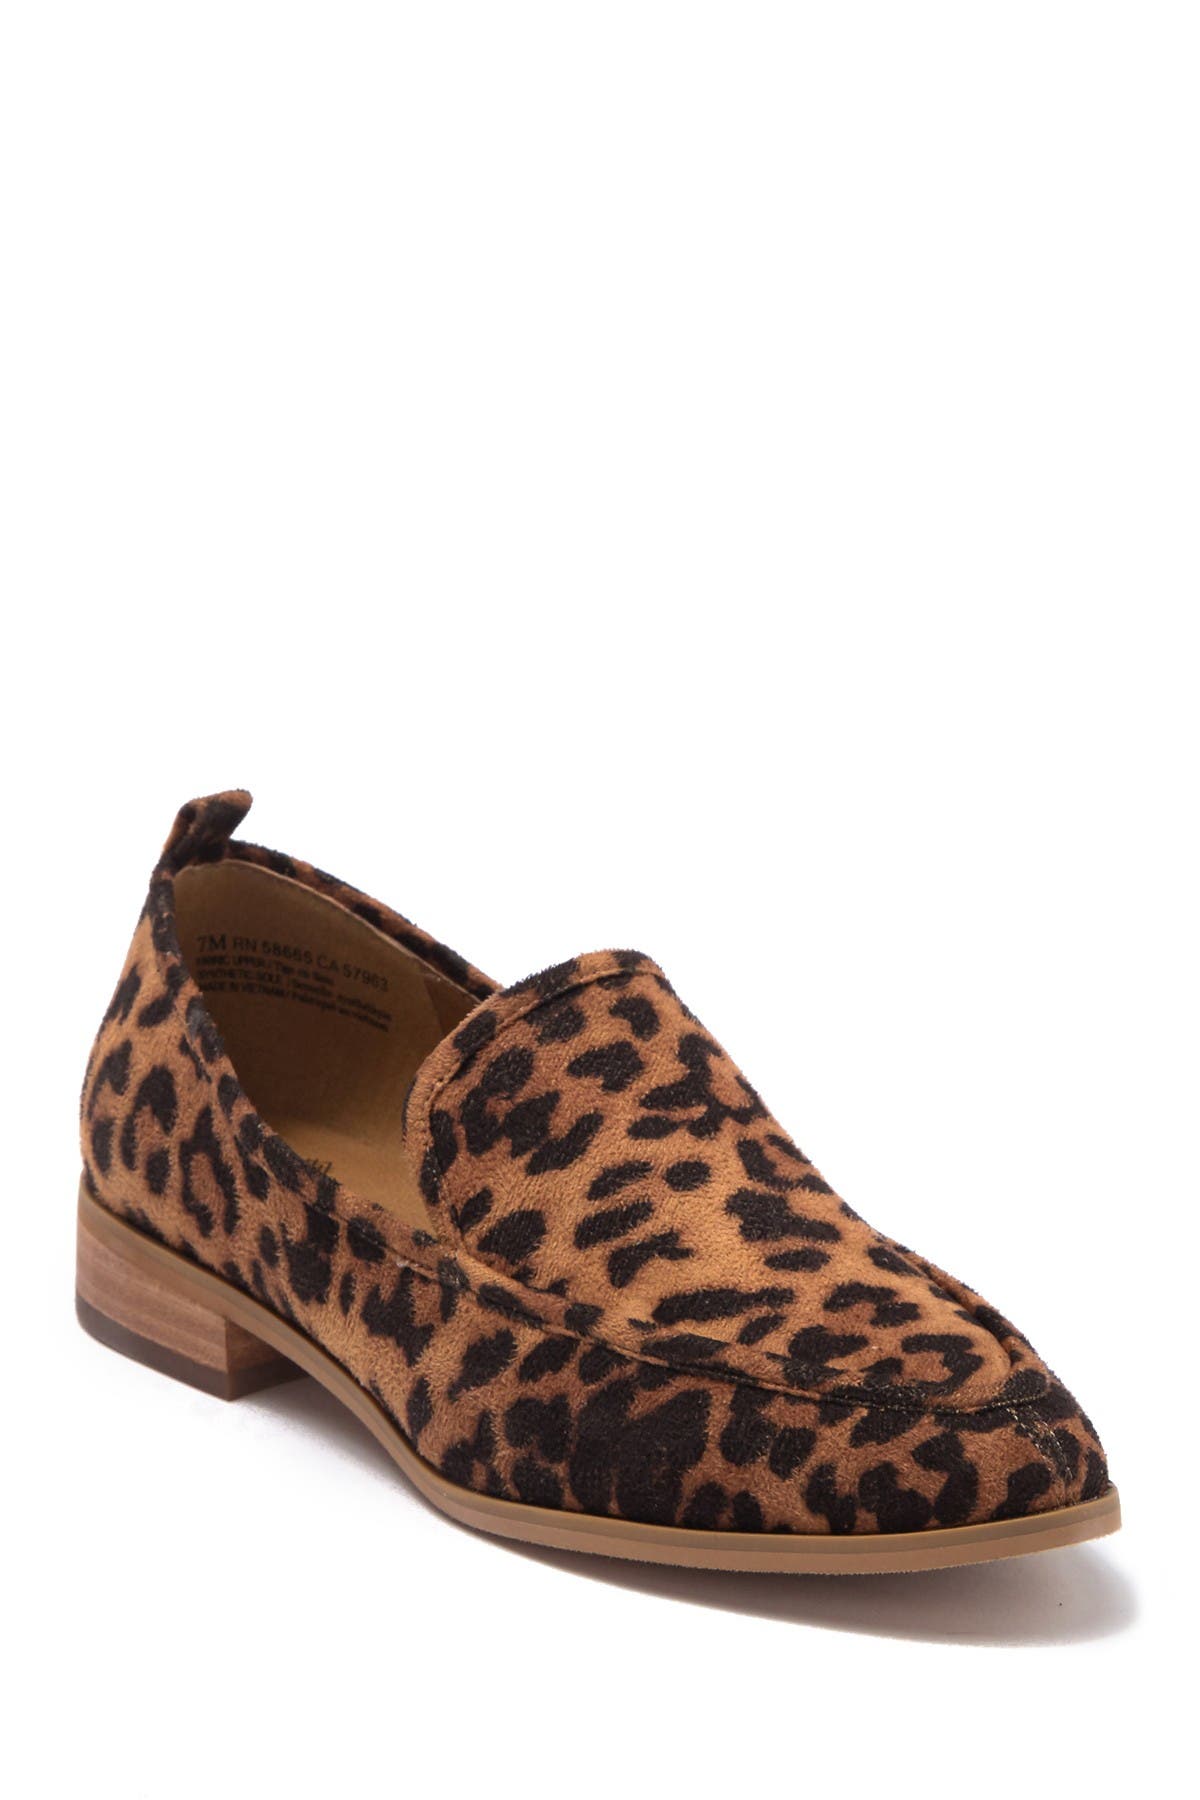 leopard print loafers canada